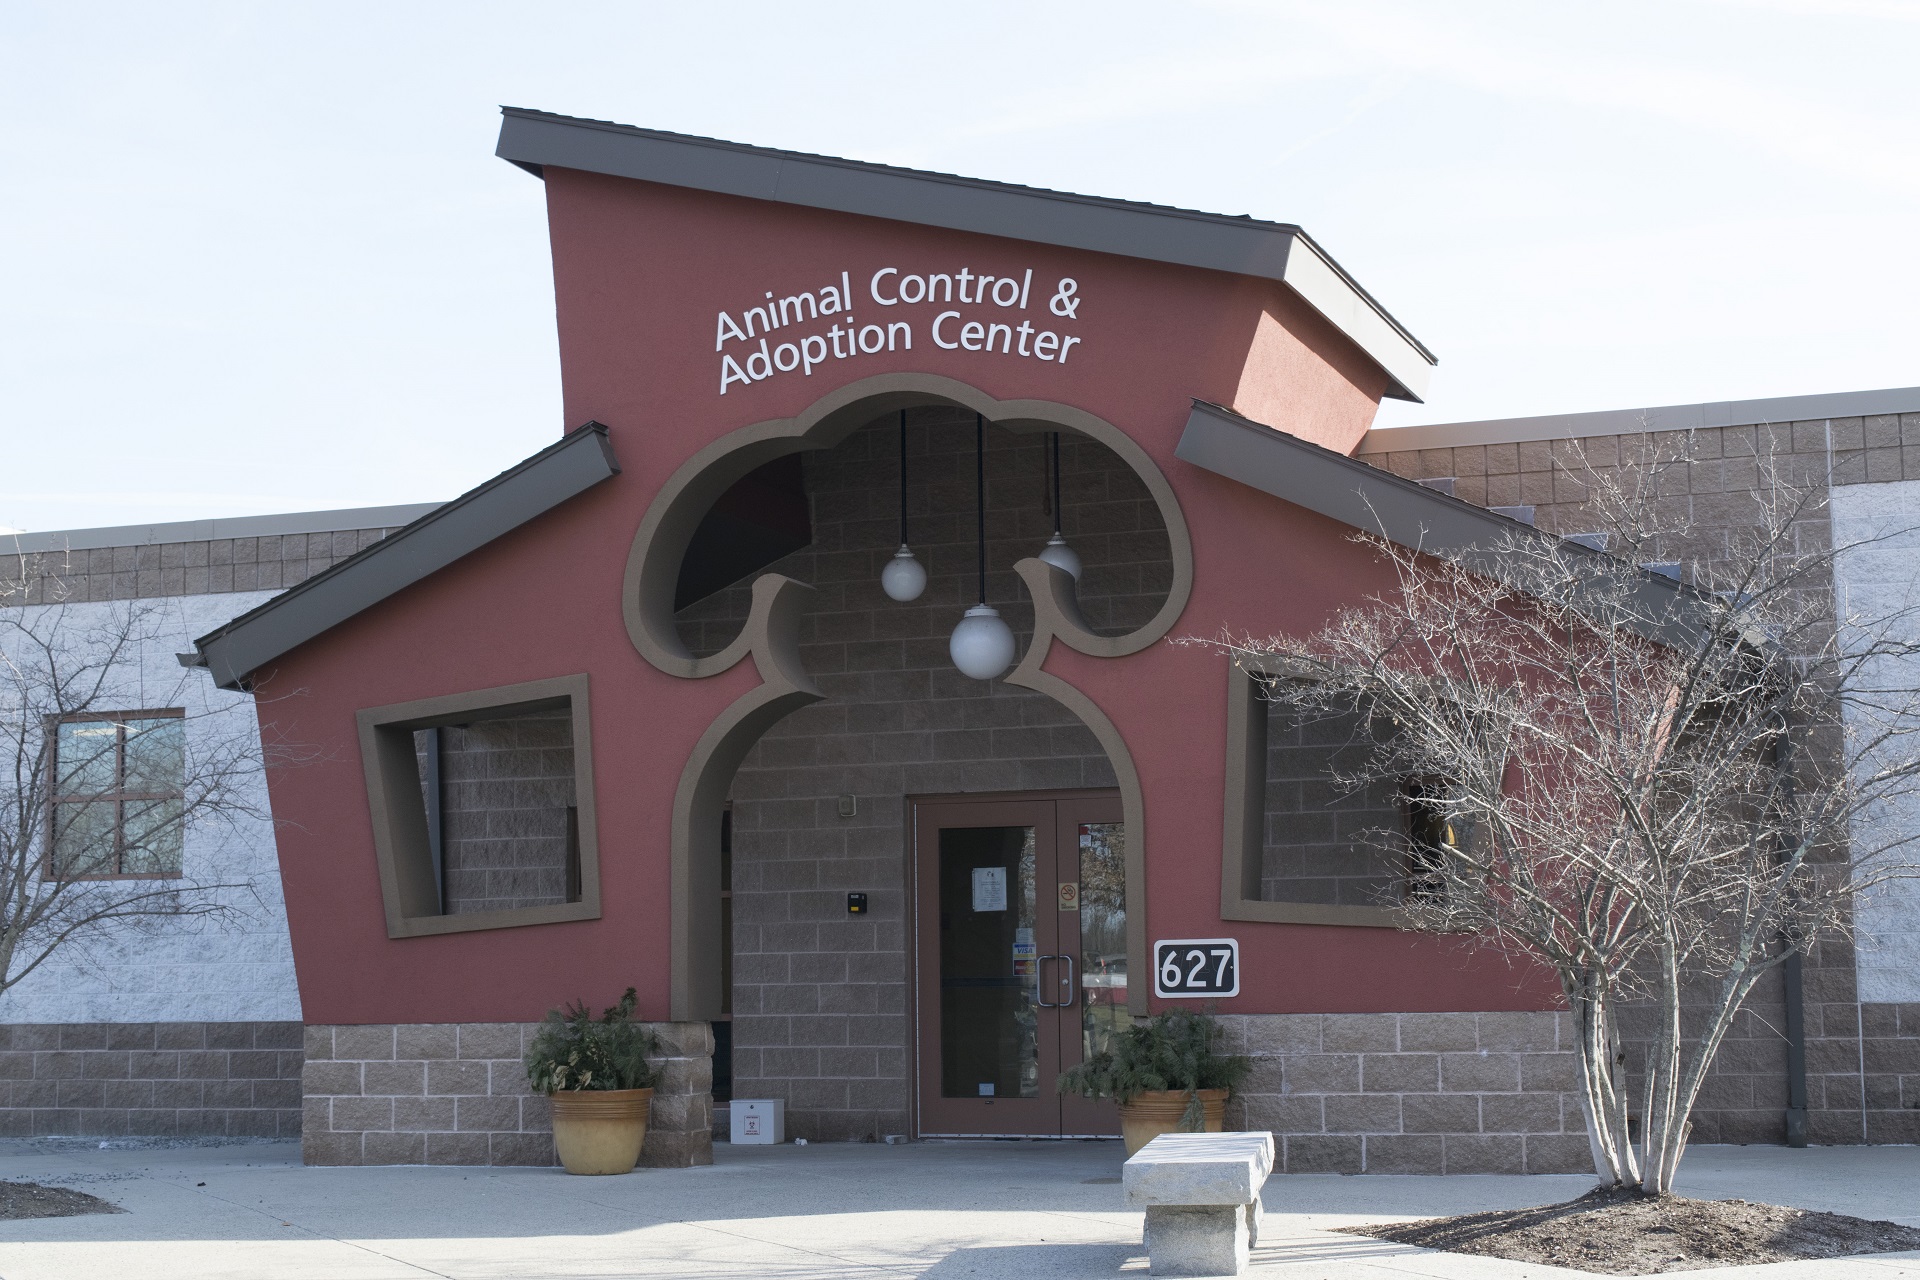 Meet the Wonderful Residents at TJ O'Connor Animal Control & Adoption